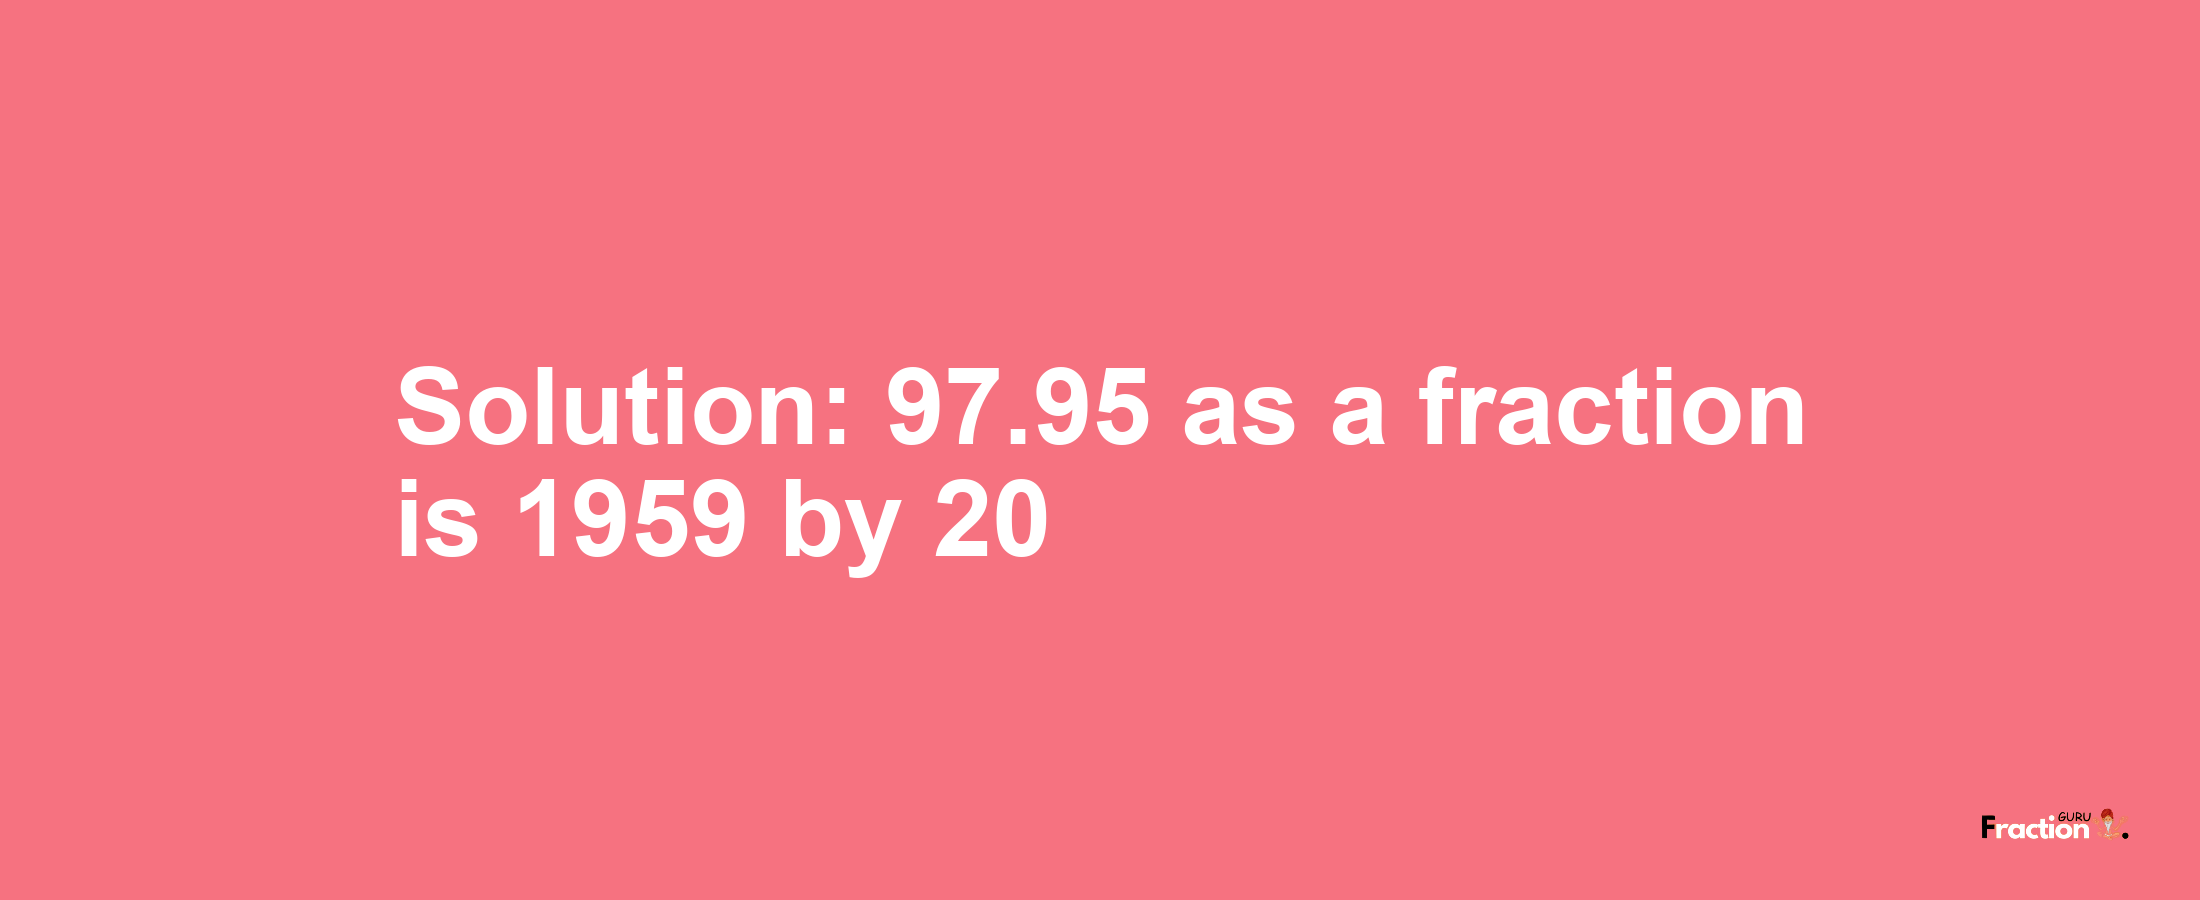 Solution:97.95 as a fraction is 1959/20